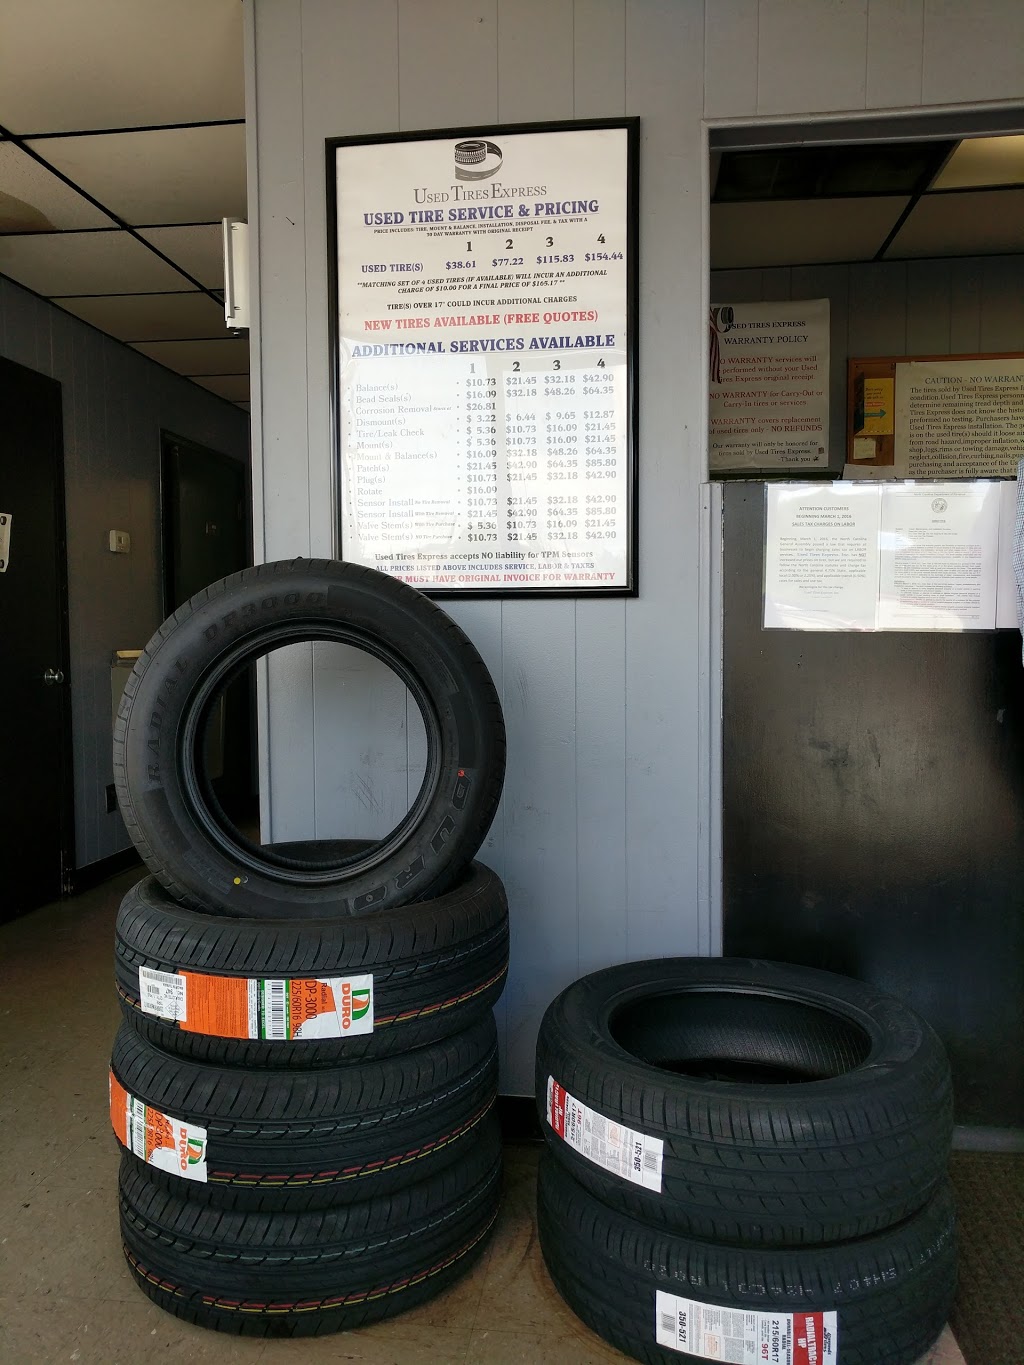 Used Tires Express | 4417 N Tryon St, Charlotte, NC 28213 | Phone: (704) 596-4000